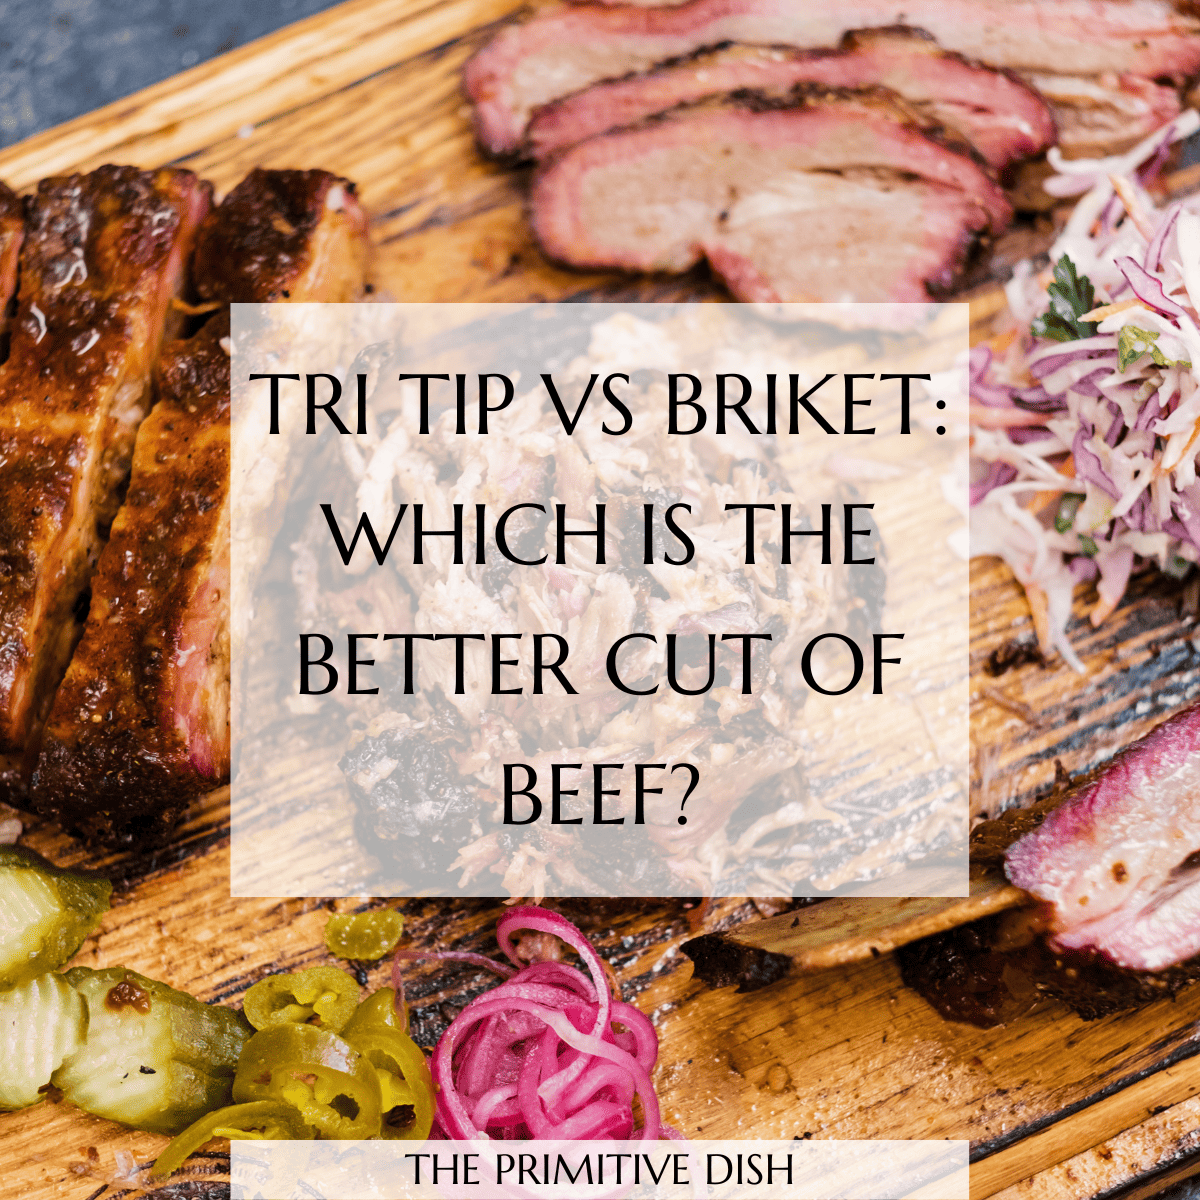 Sliced brisket on a wood cutting board near veggies with a text overlay reading tri tip vs brisket: which is the better cut of beef